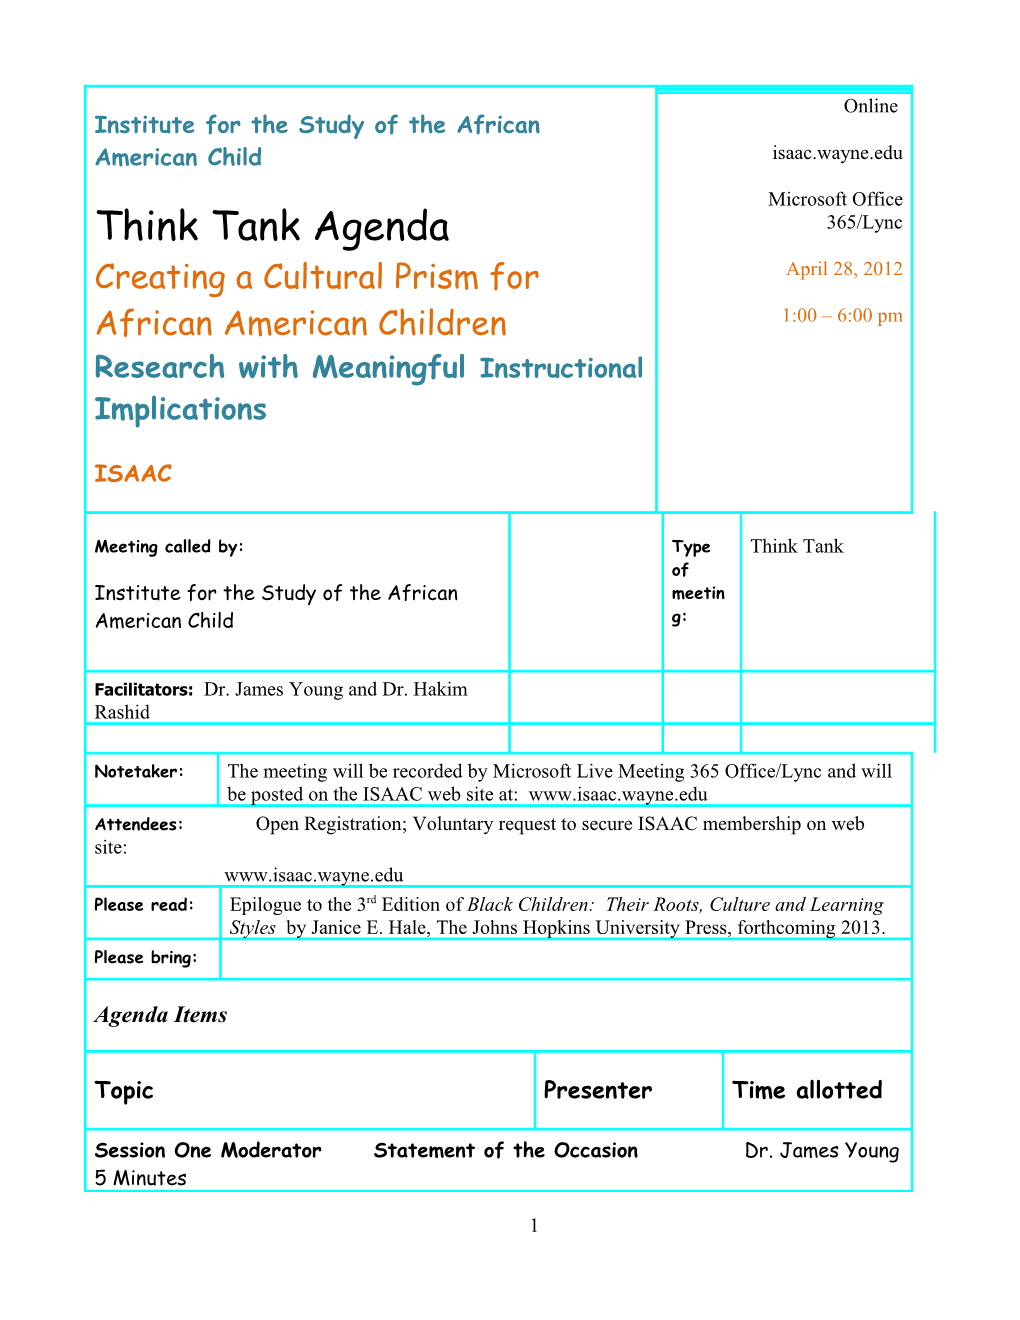 Institute for the Study of the African American Child Think Tank Agenda Creating a Cultural